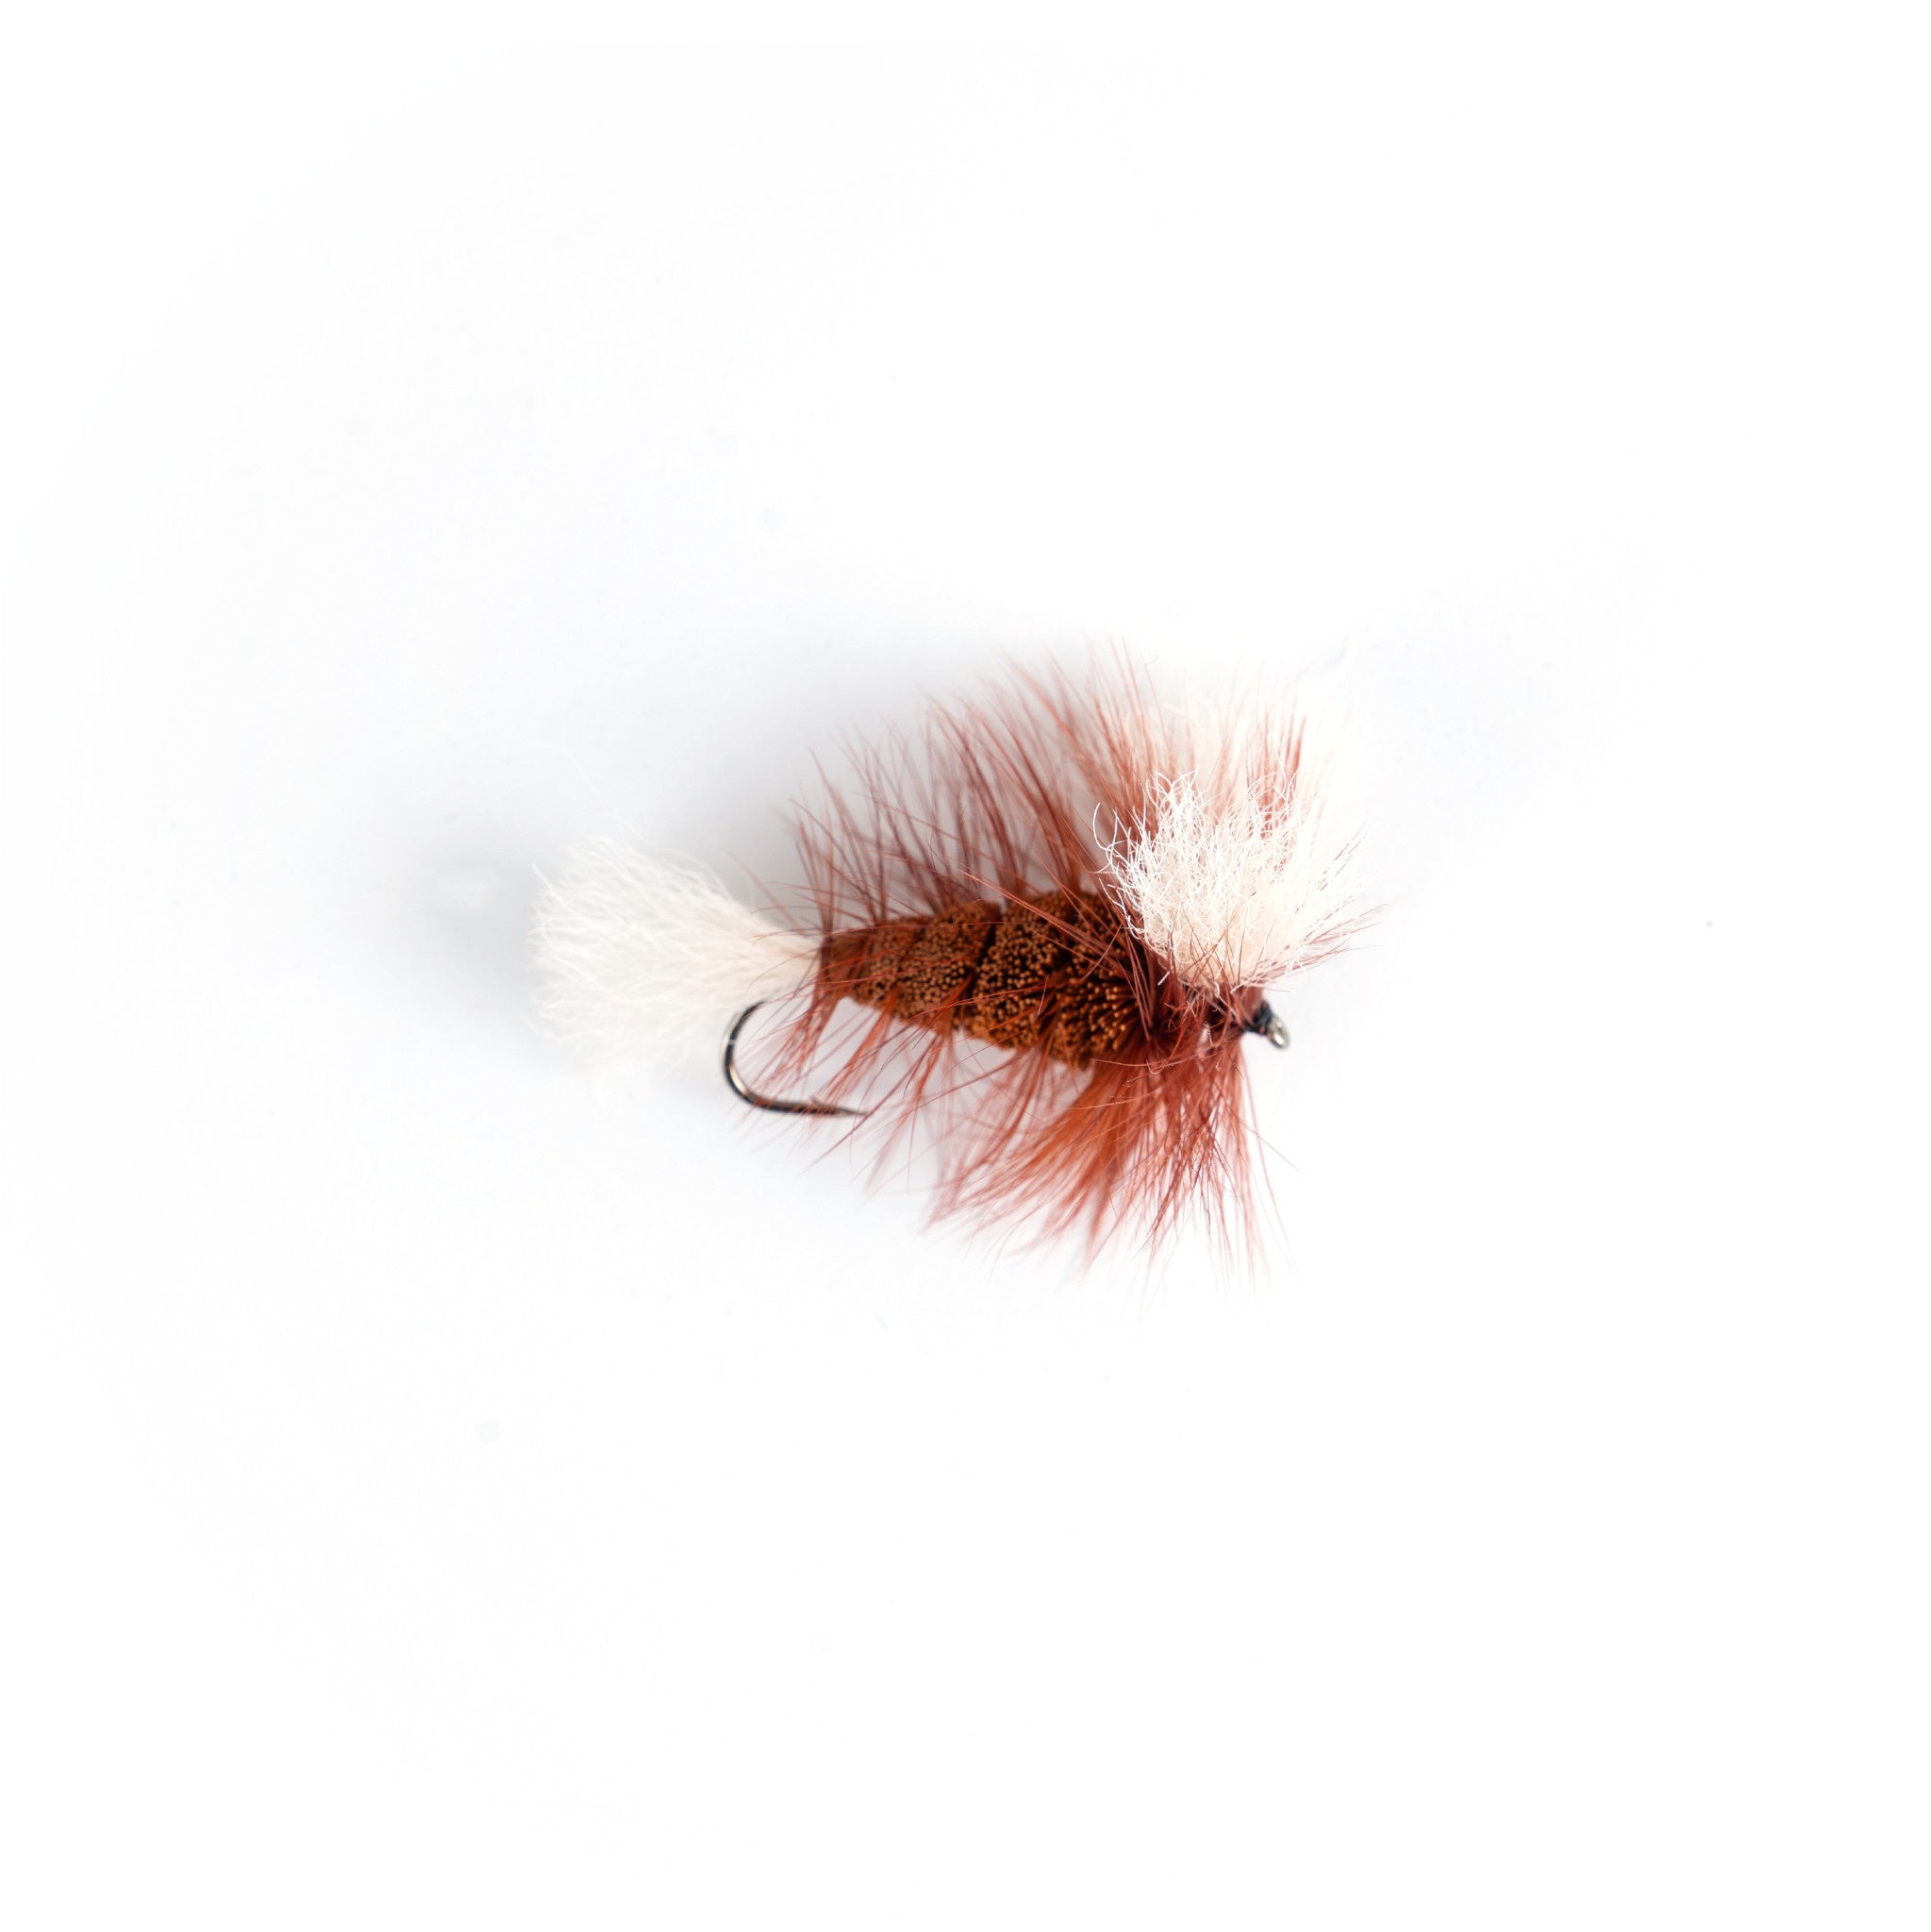 Burned Orange - White Tail - Brown Hackle (Wulff Bomber)